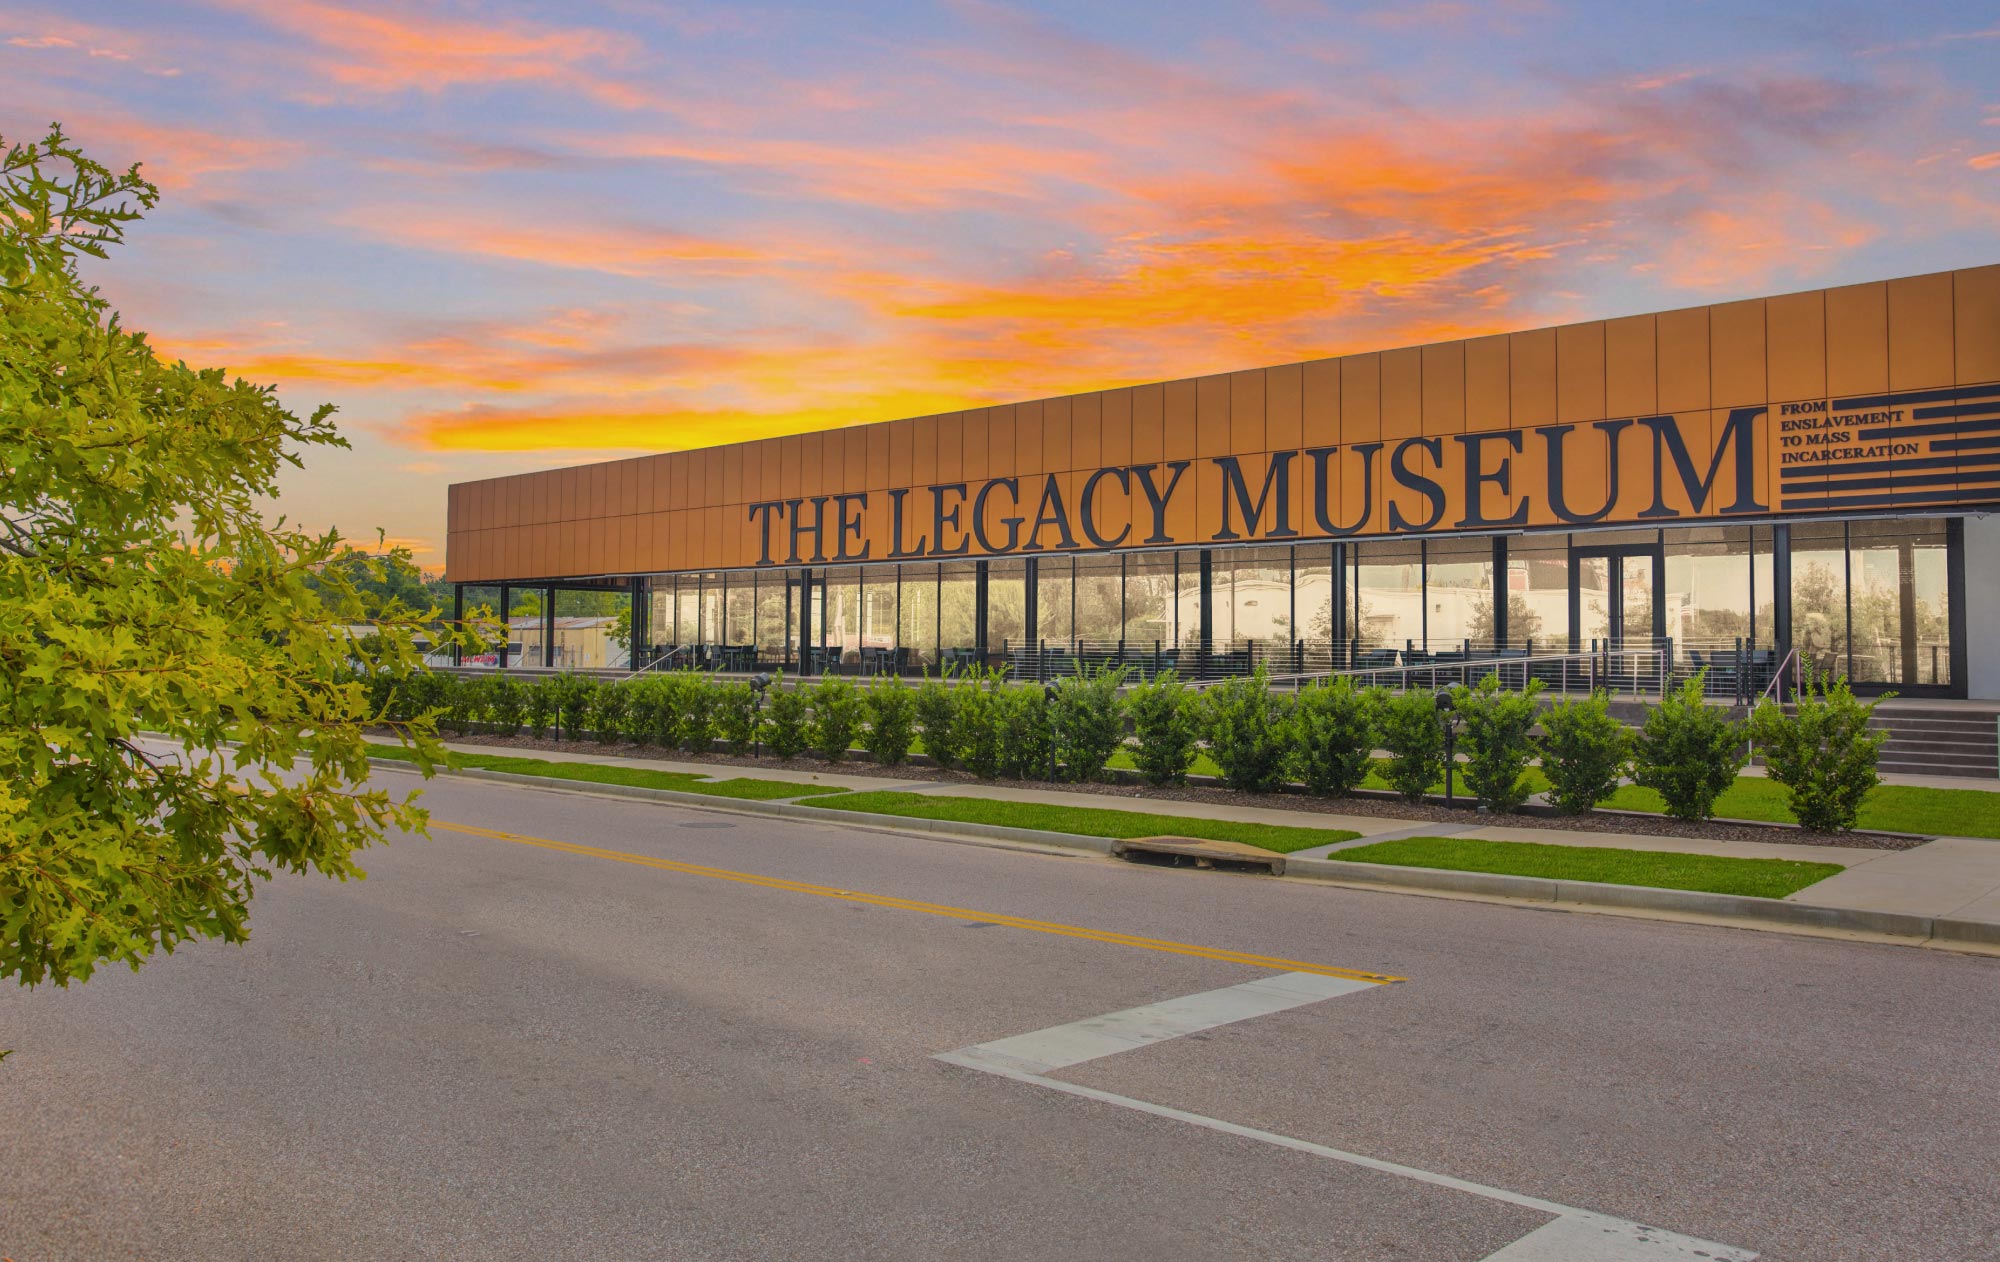 The front of the Legacy Museum with a striking gold, pink, and orange sunset behind.